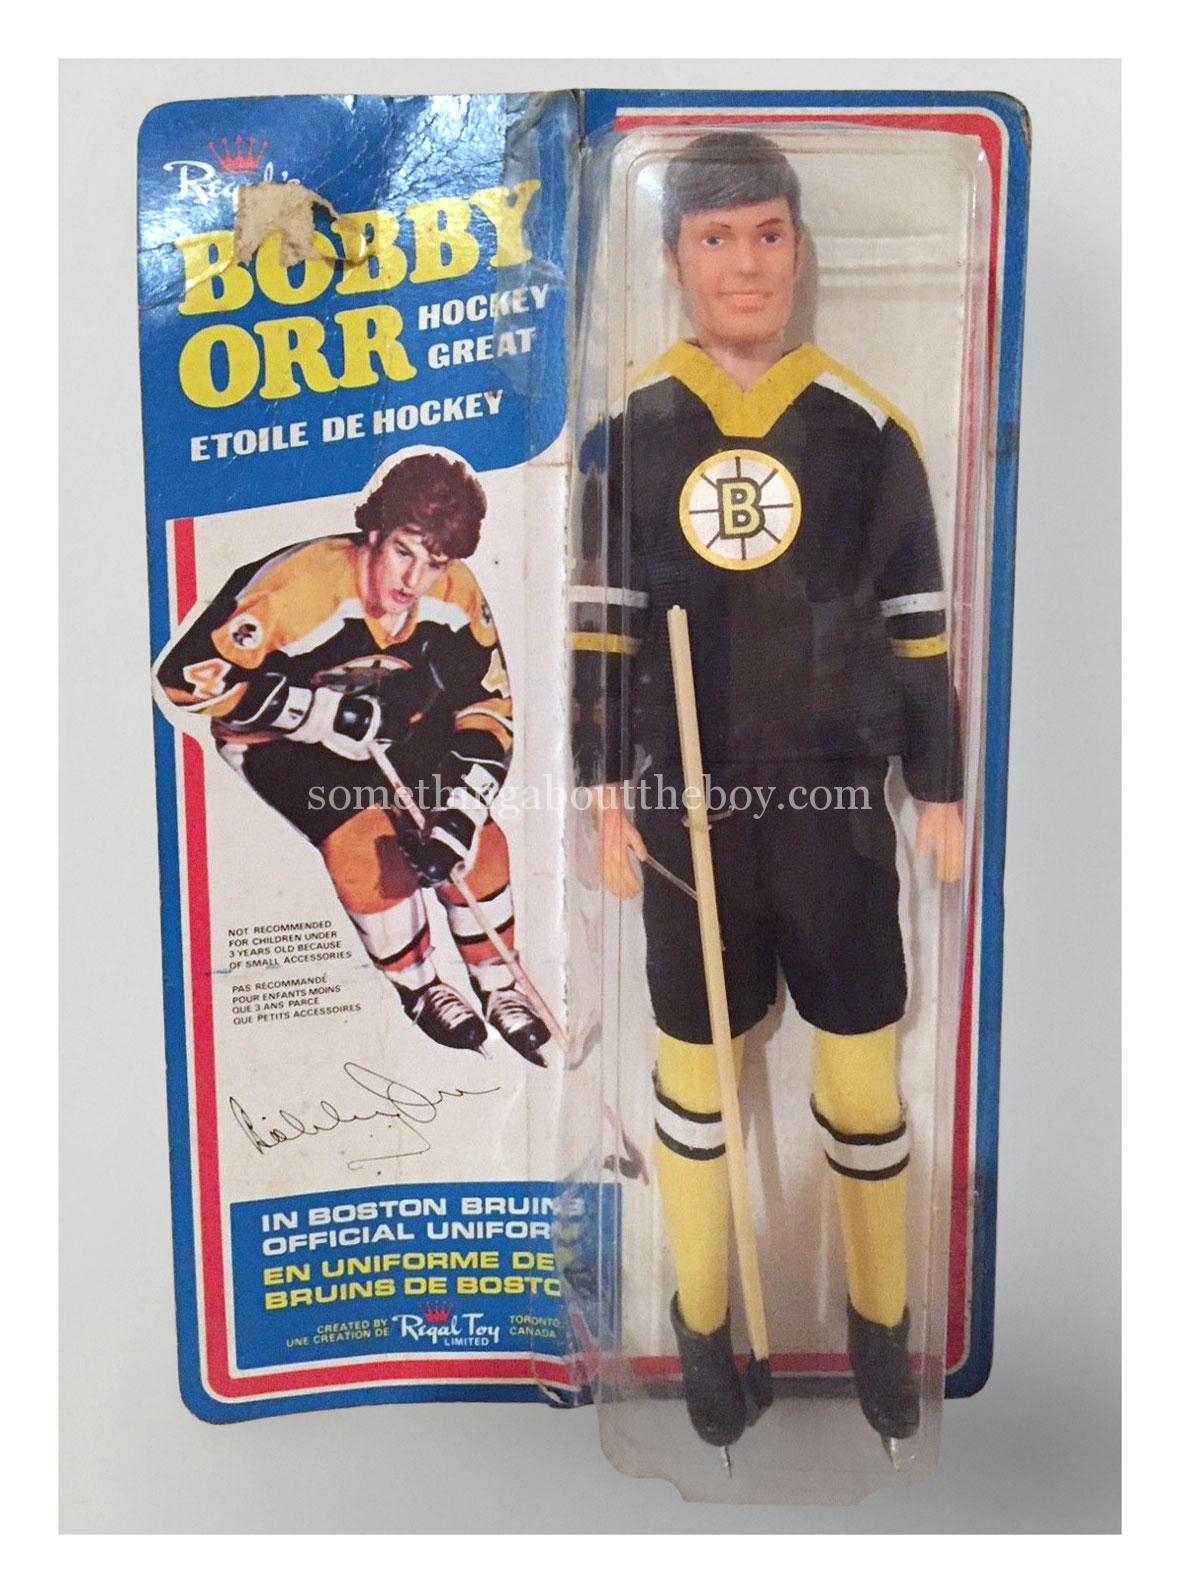 1975 Bobby Orr by Regal Toy Limited